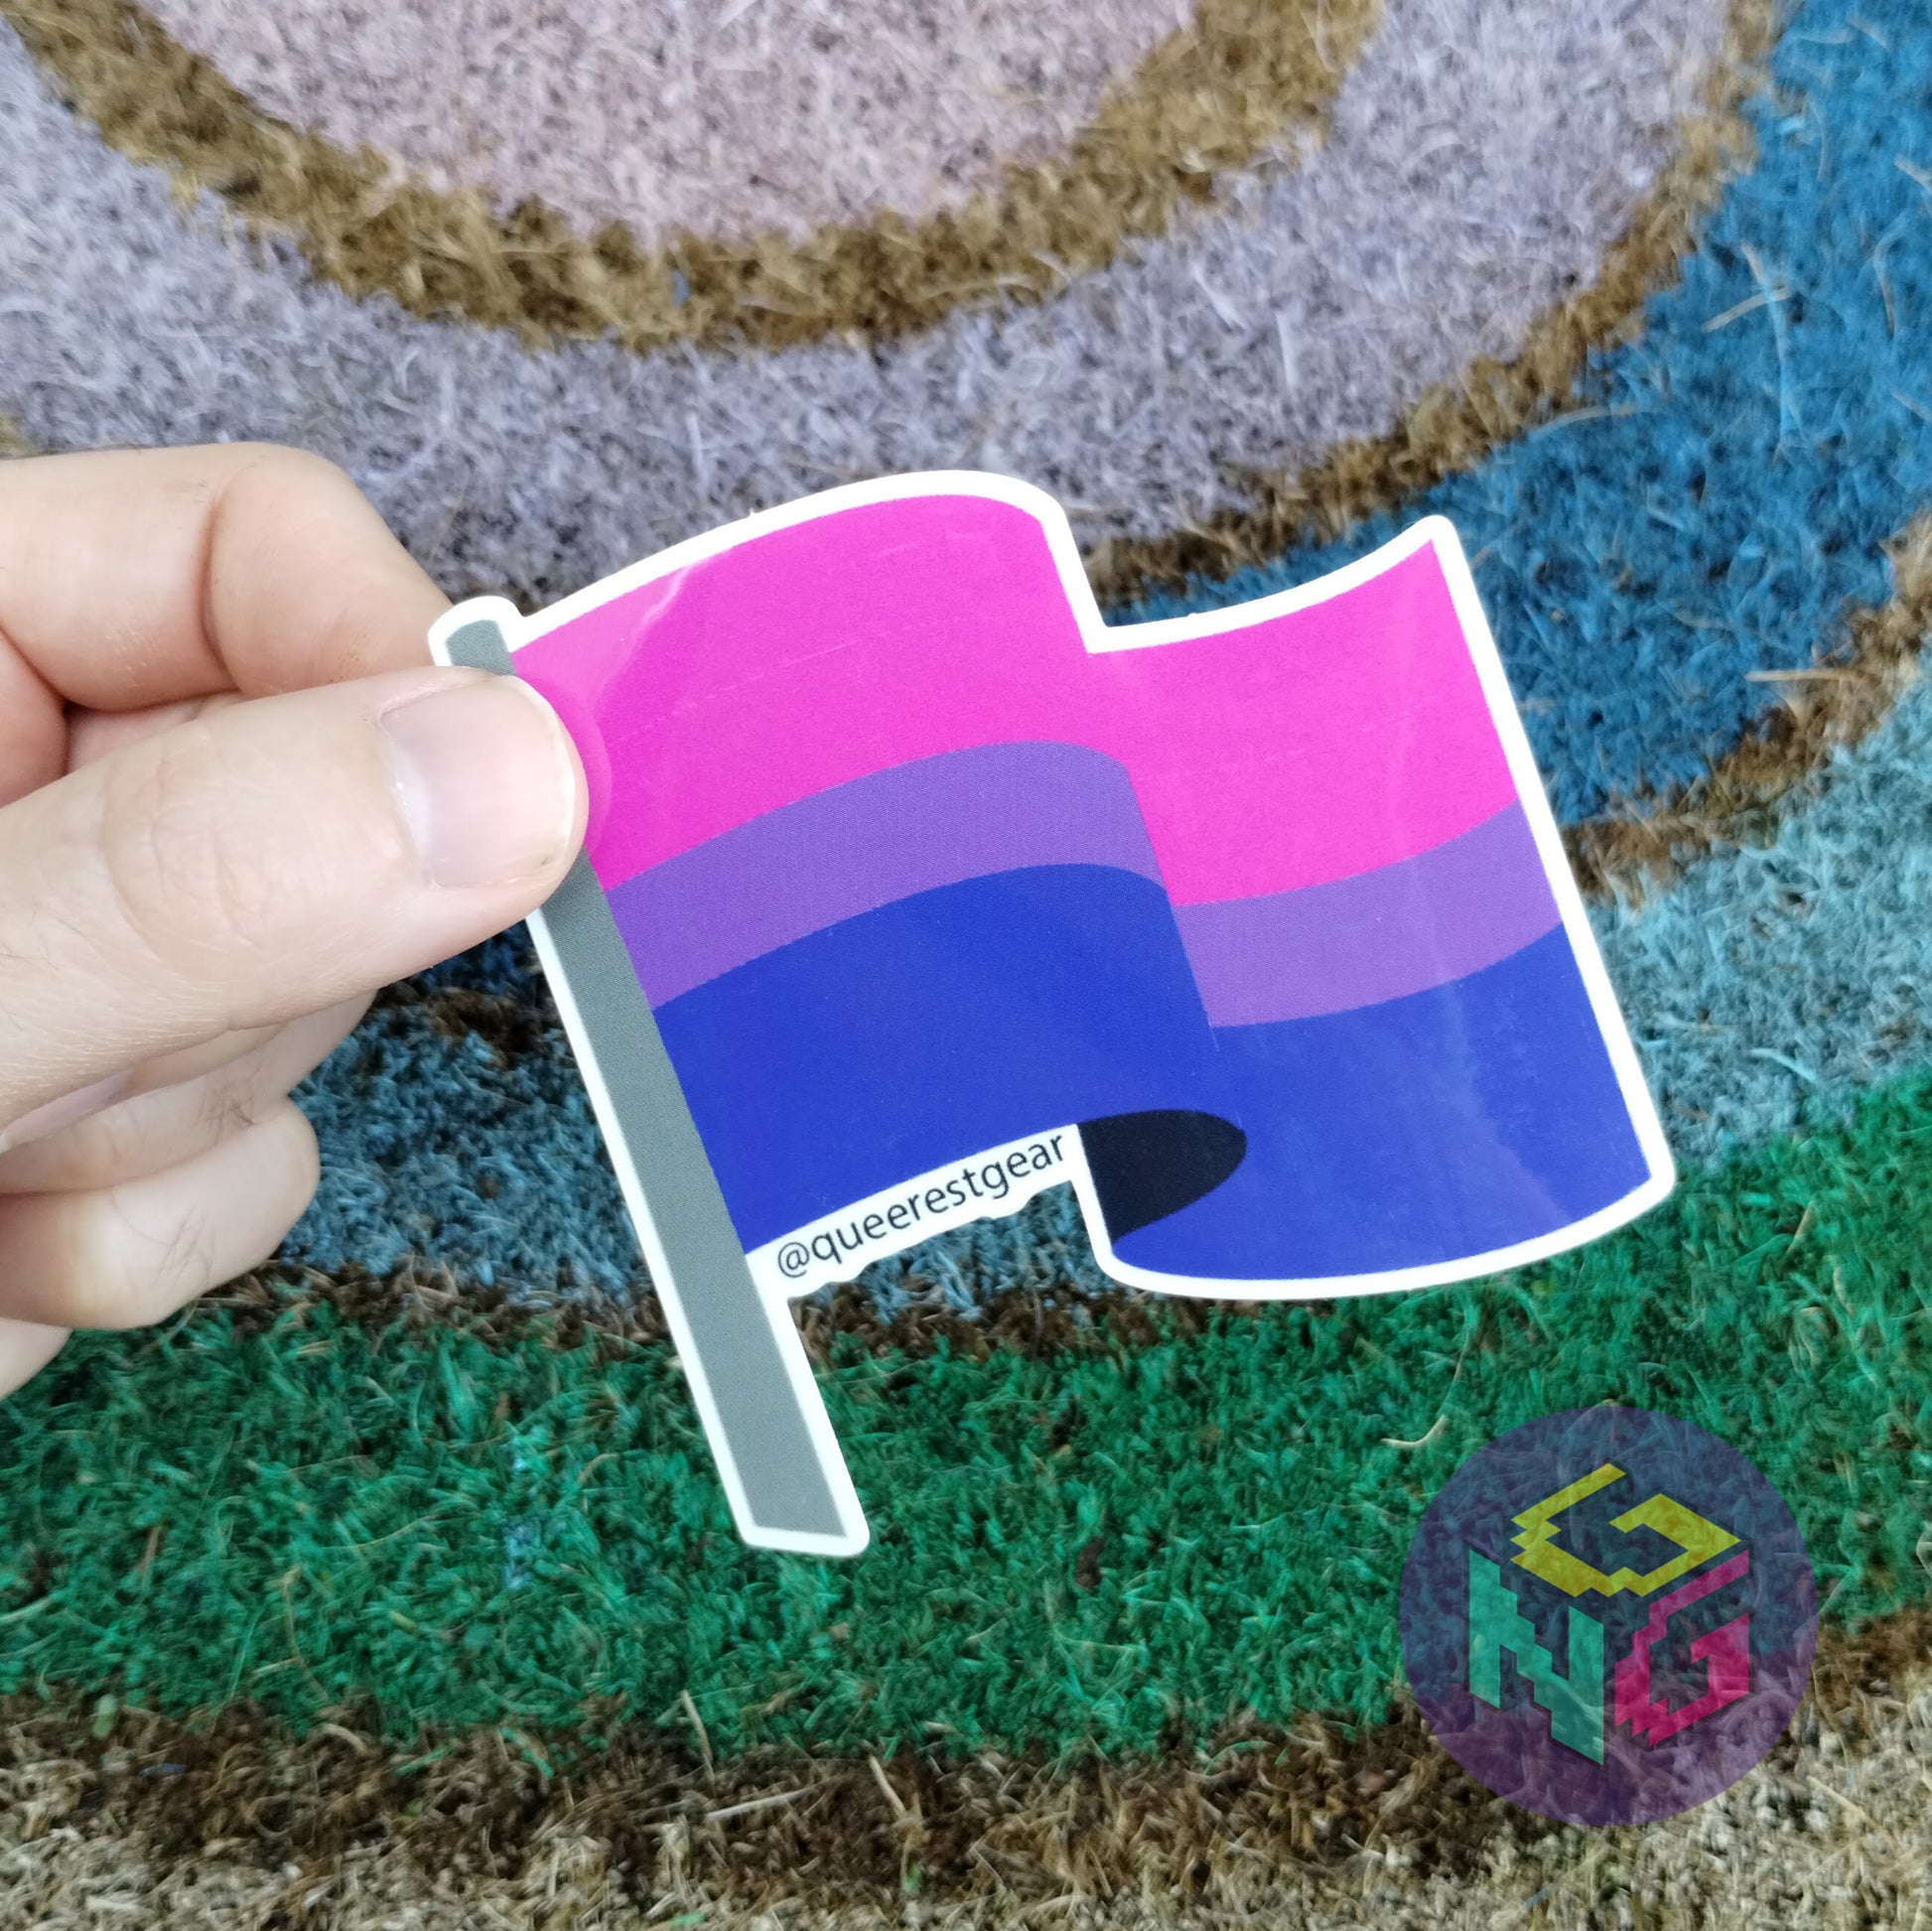 bisexual flag sticker held between thumb and finger against rainbow welcome mat